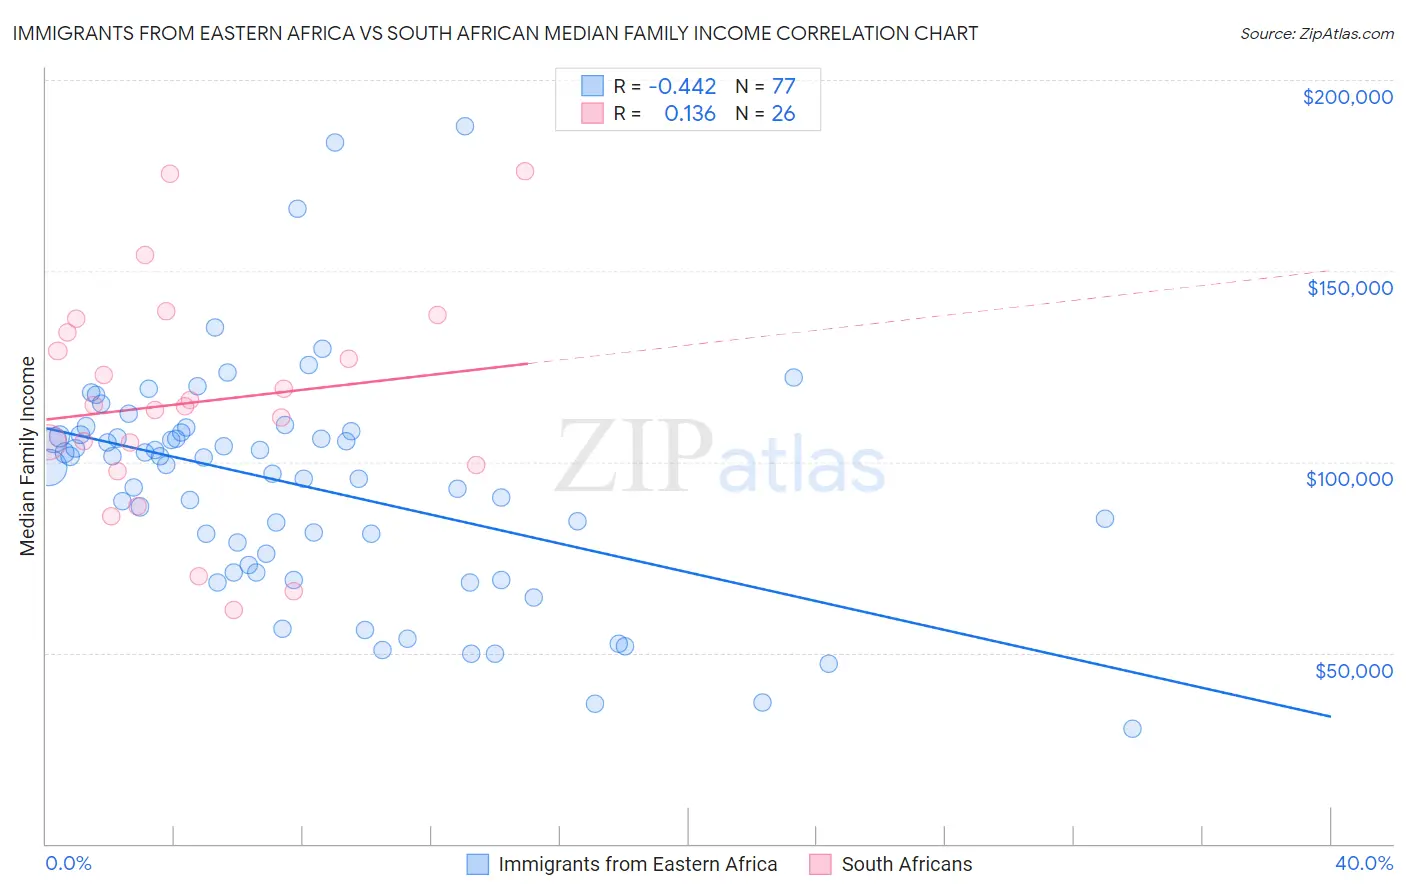 Immigrants from Eastern Africa vs South African Median Family Income